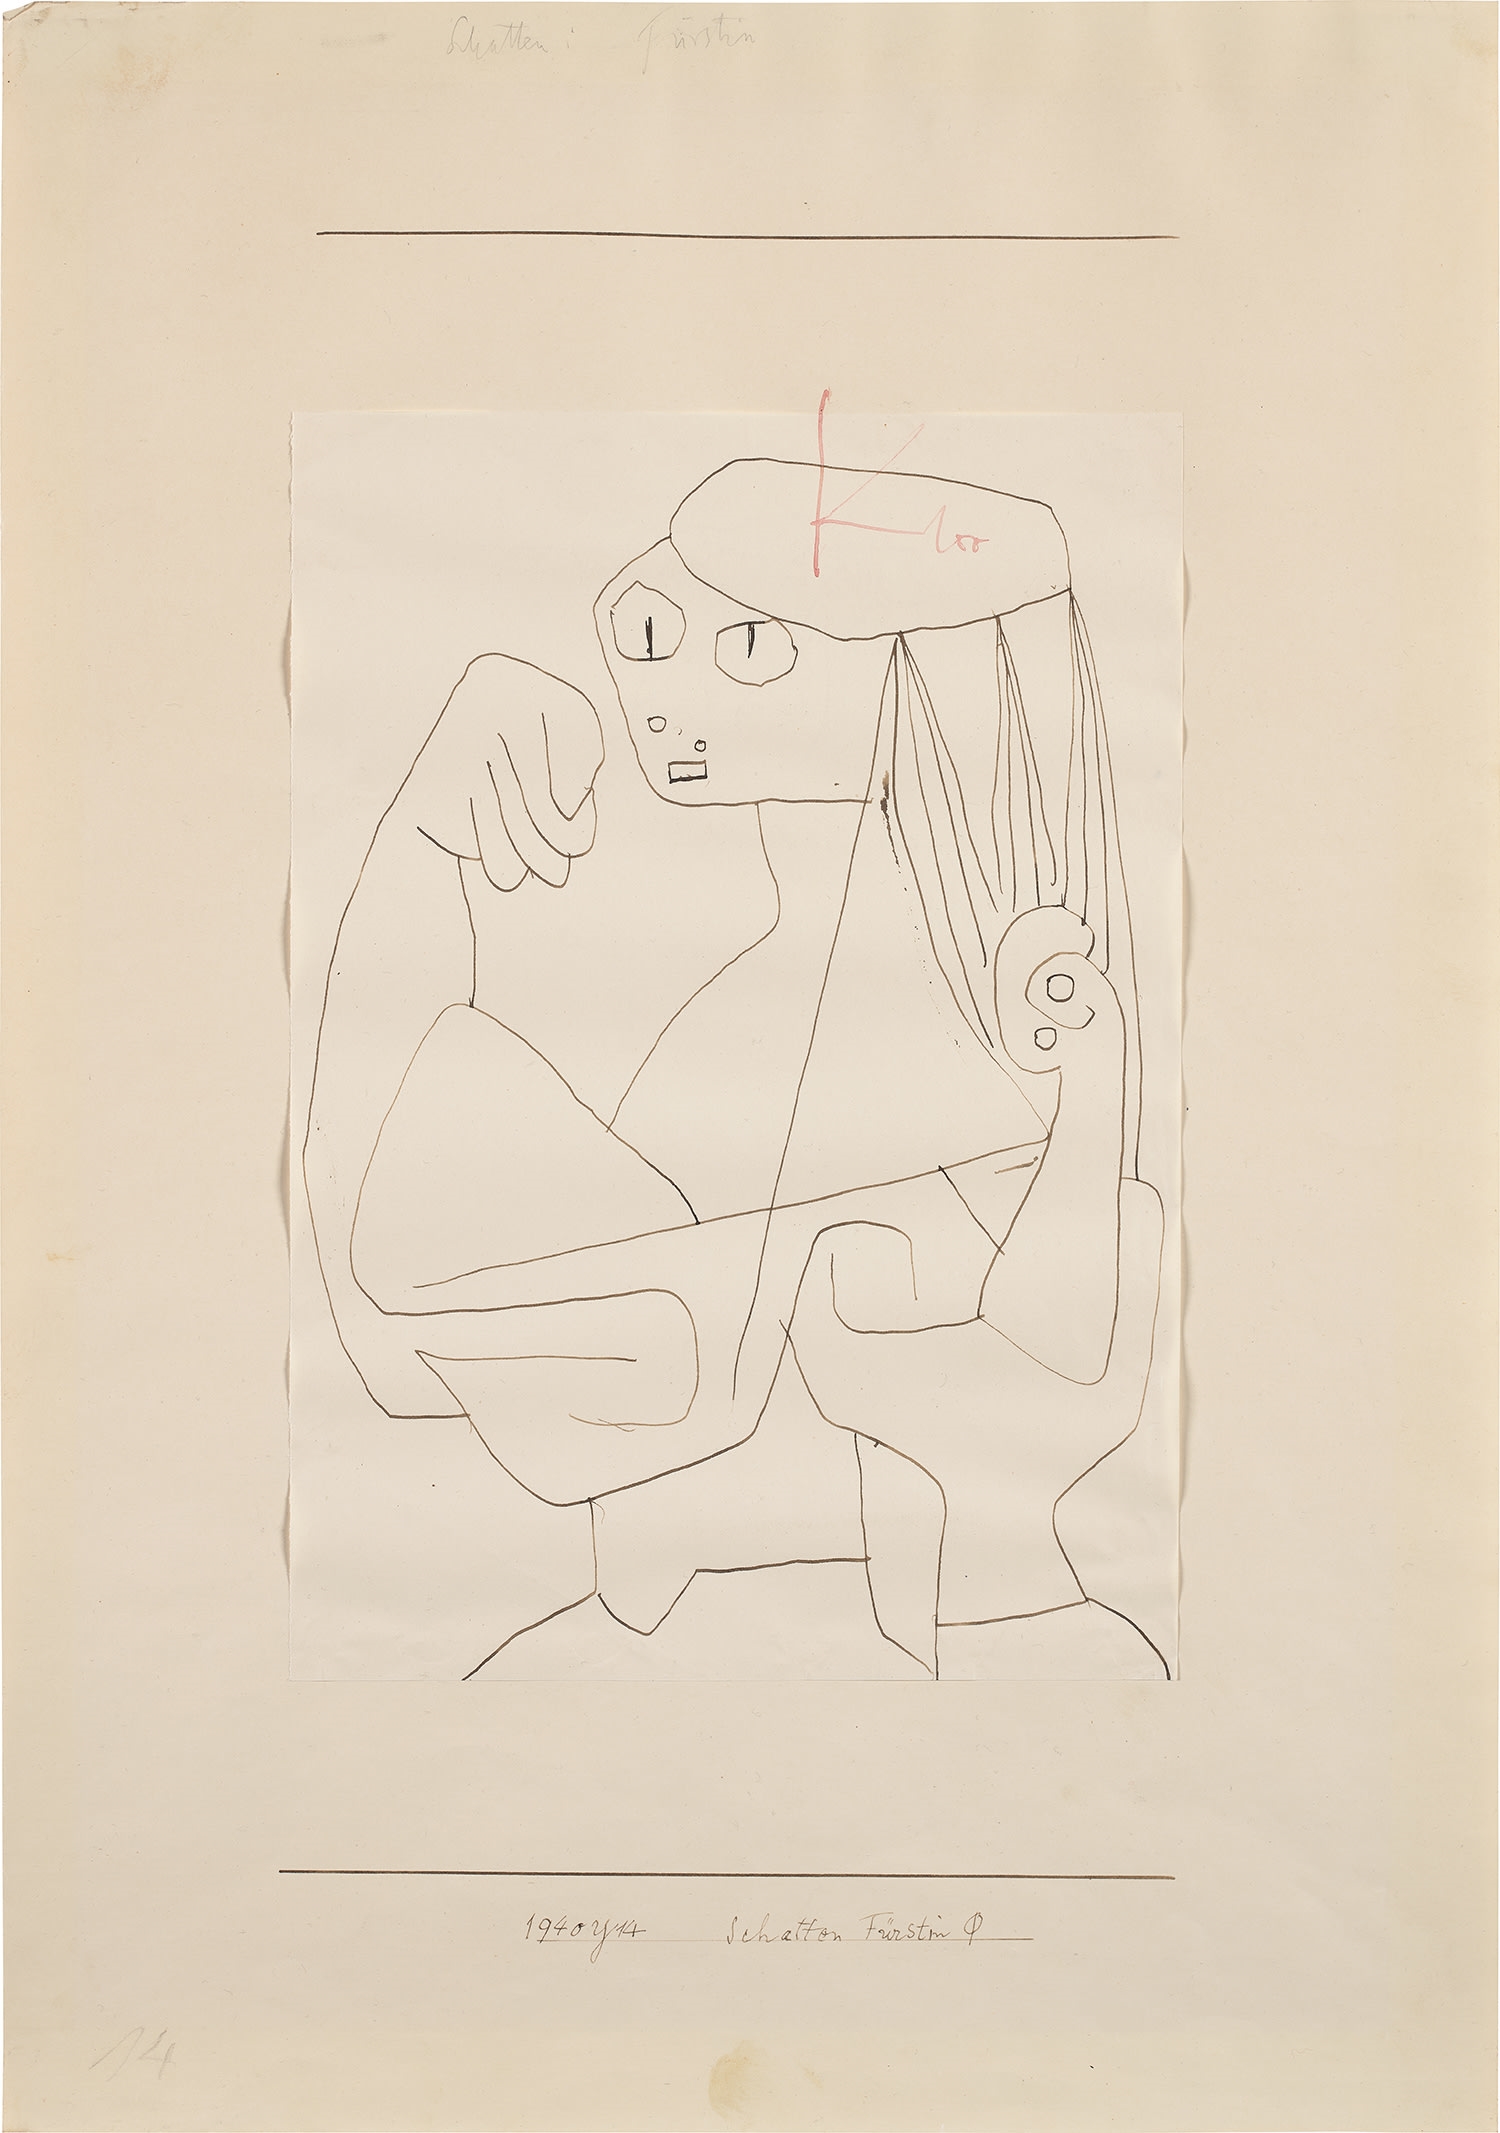 Schatten Fürstin (Princess of the Shadows) by Paul Klee, Executed in 1940